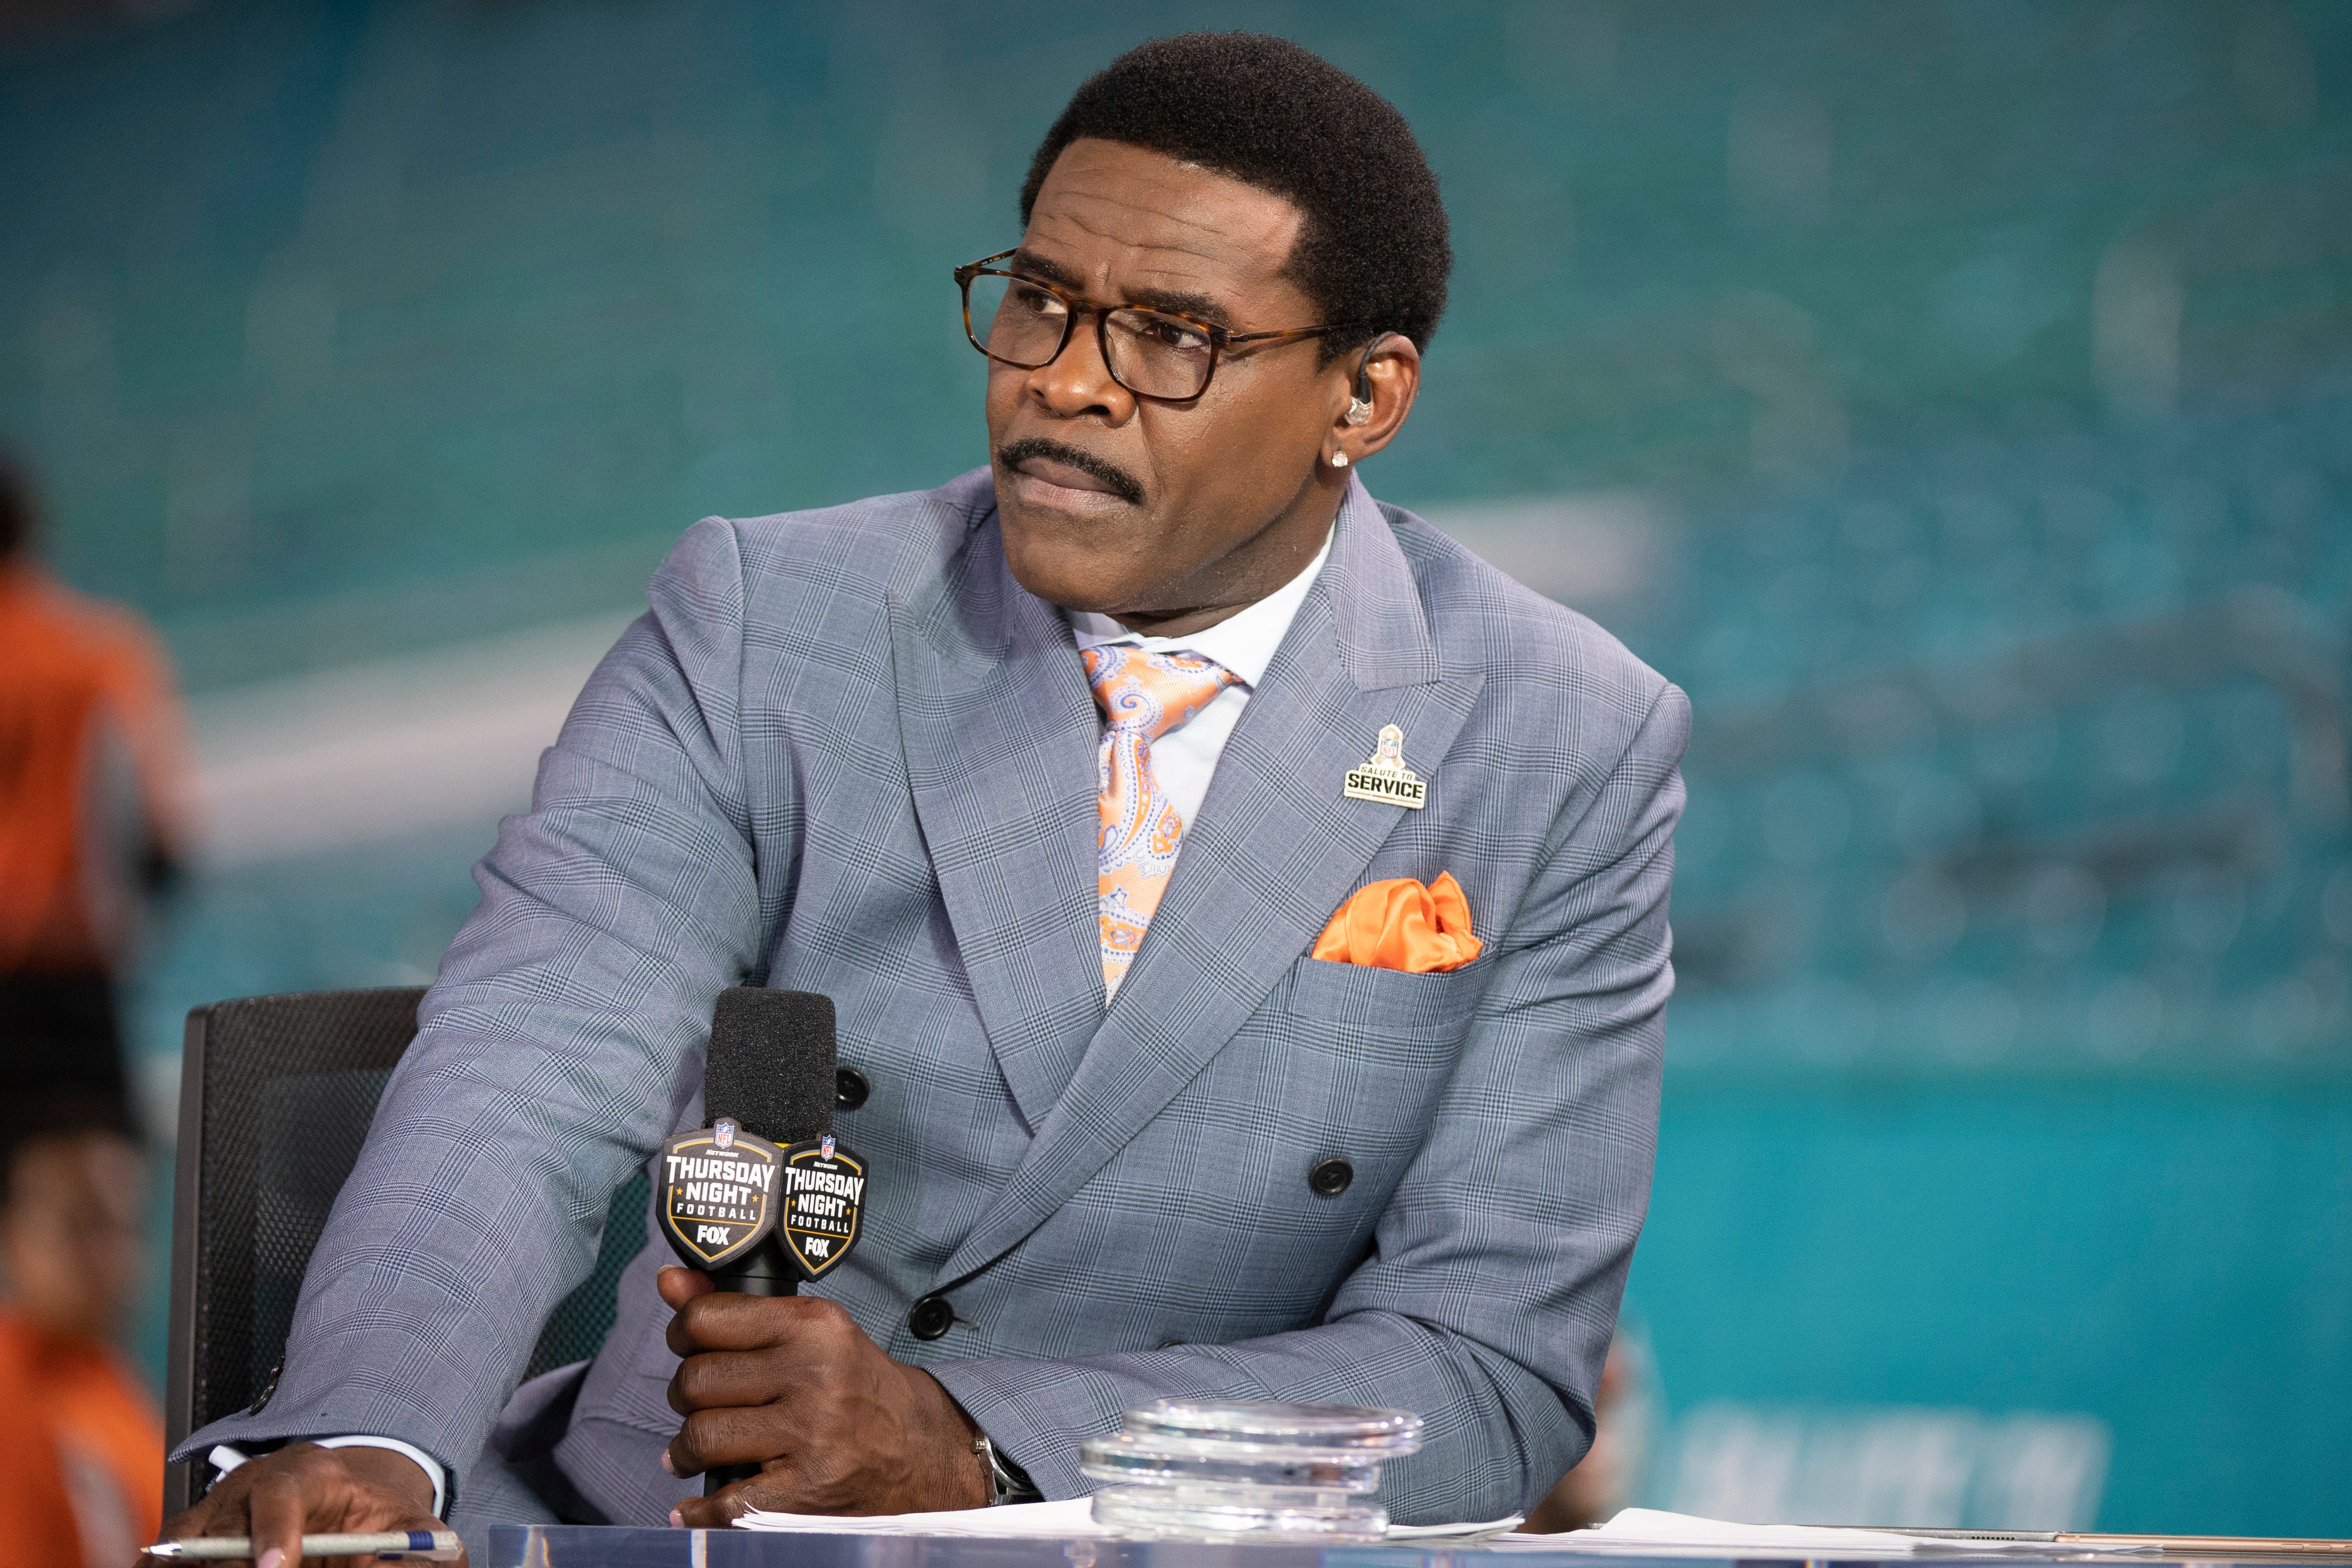 Michael Irvin sues accuser, Marriott for $100 million over accusation of misconduct